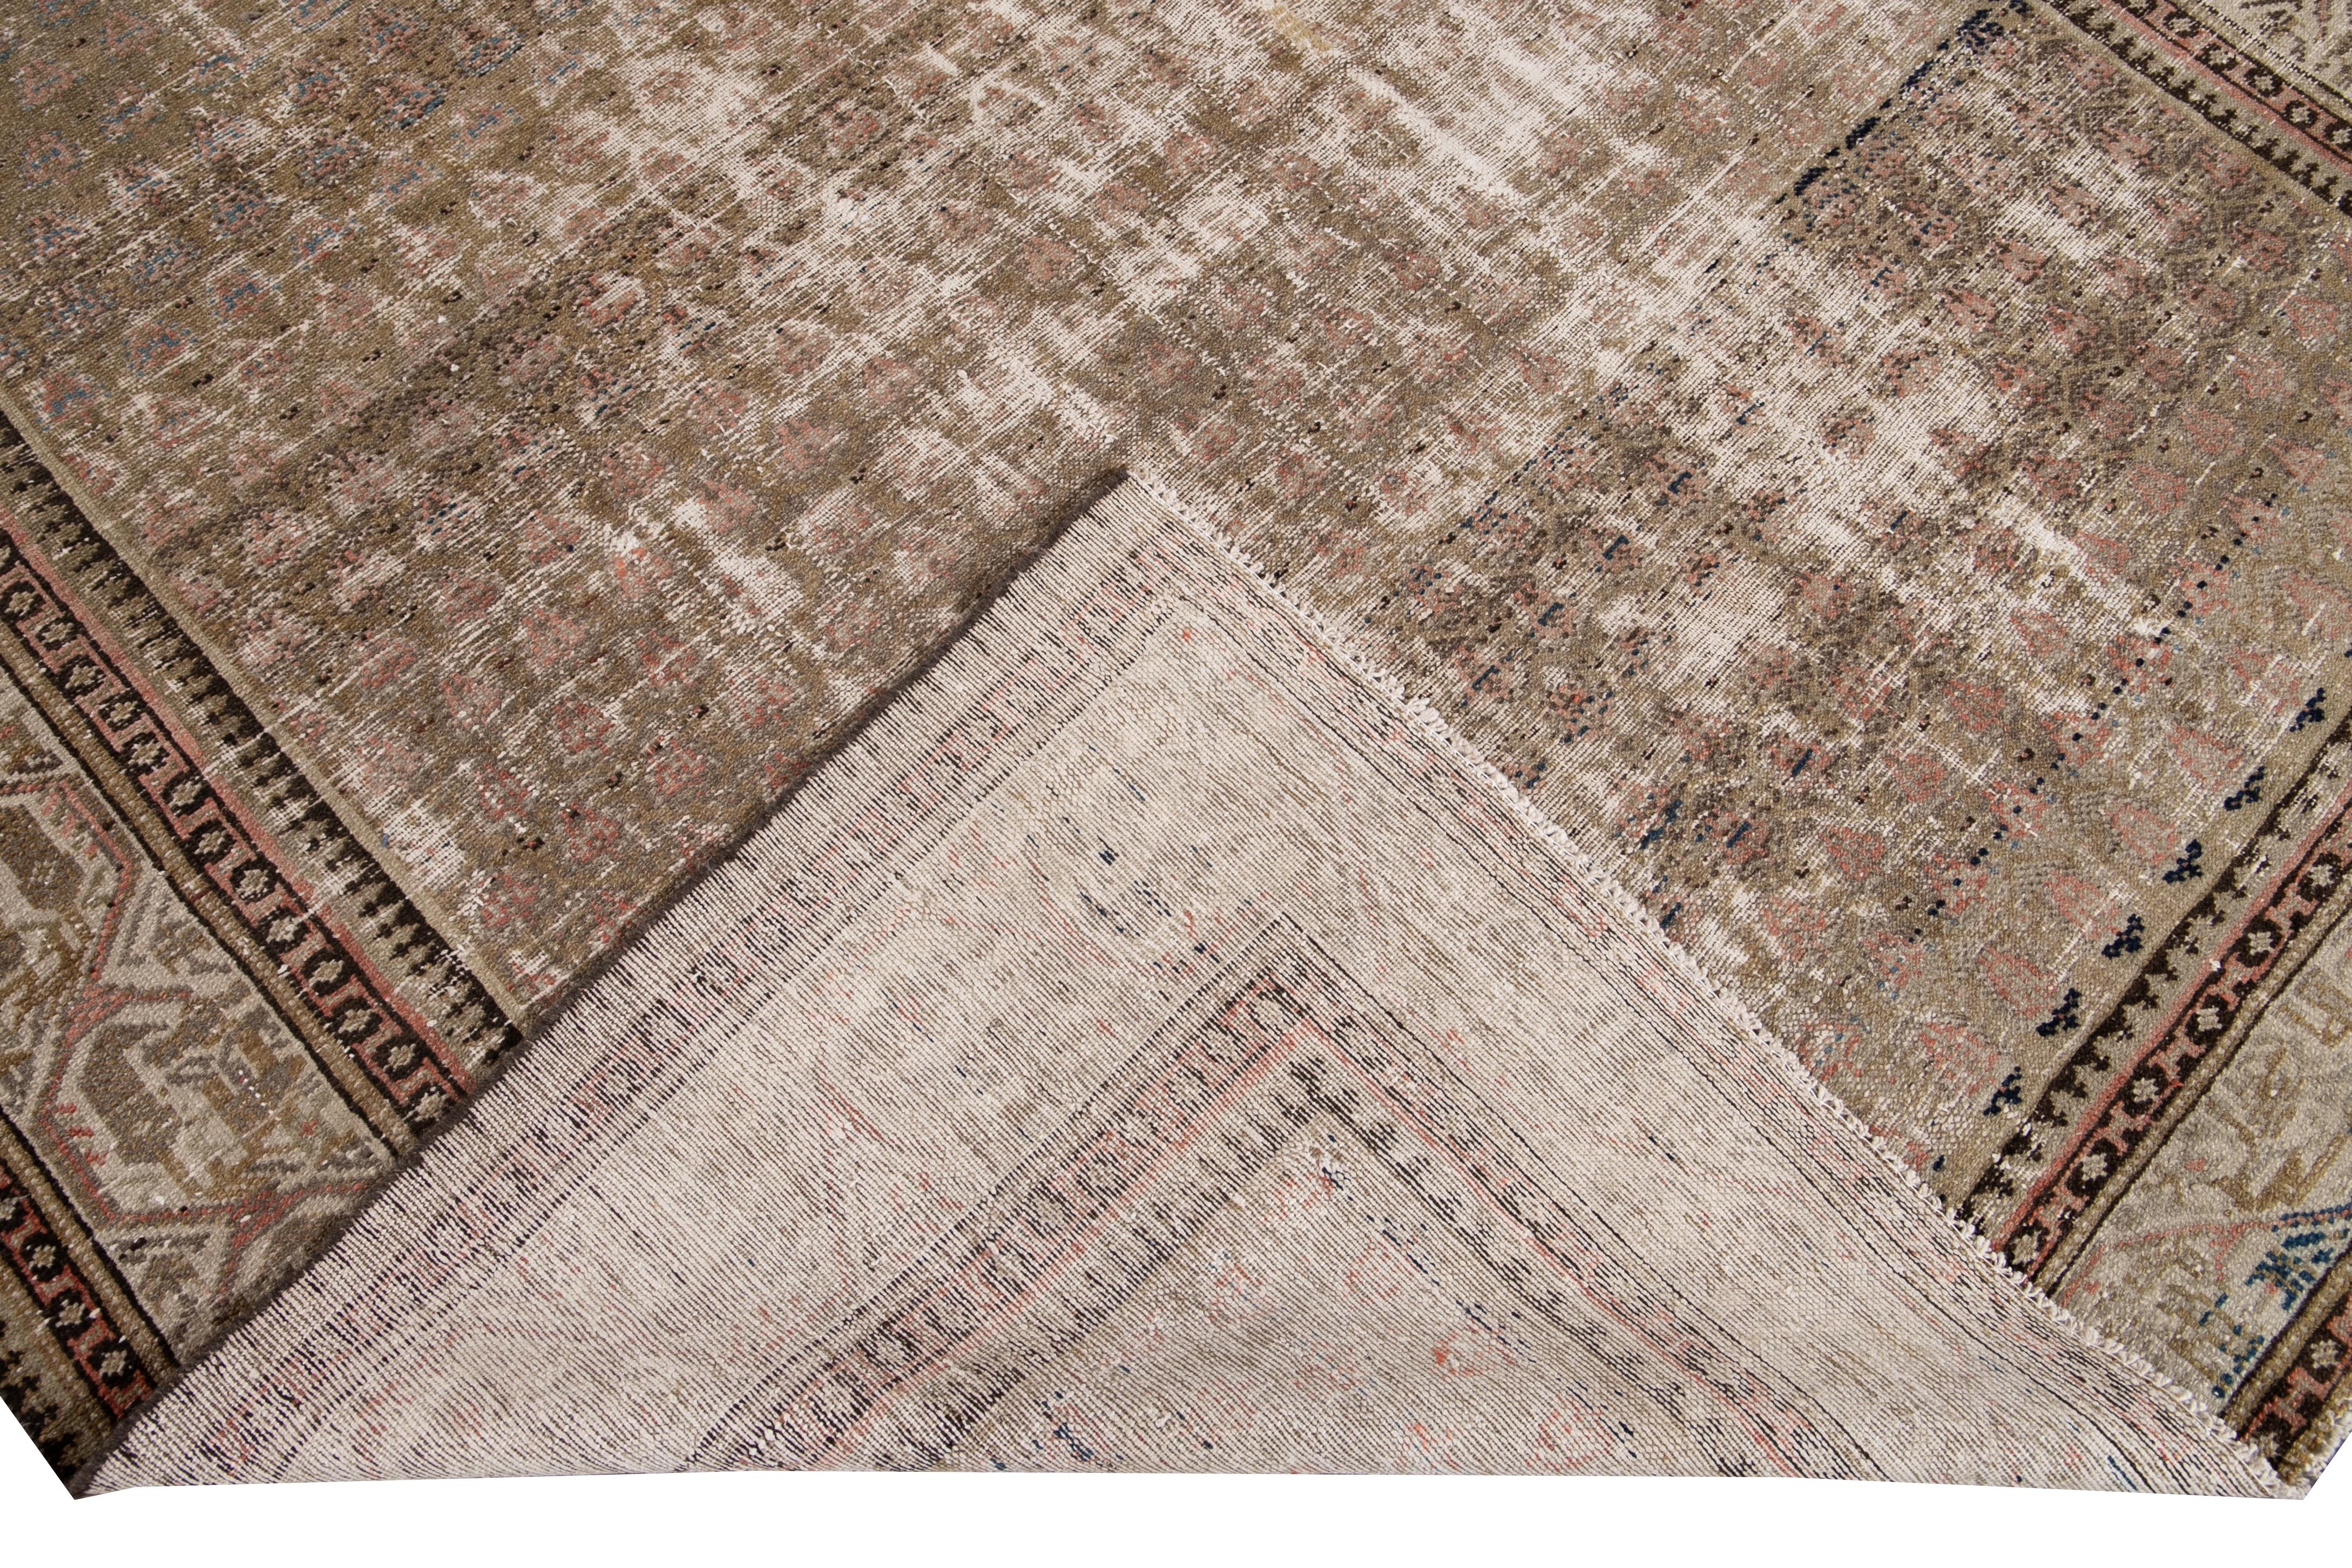 Beautiful vintage Malayer hand knotted wool rug with a brown field. This Malayer piece has beige, blue, and pink accents in an all-over geometric shabby chic design.

This rug measures: 6'5